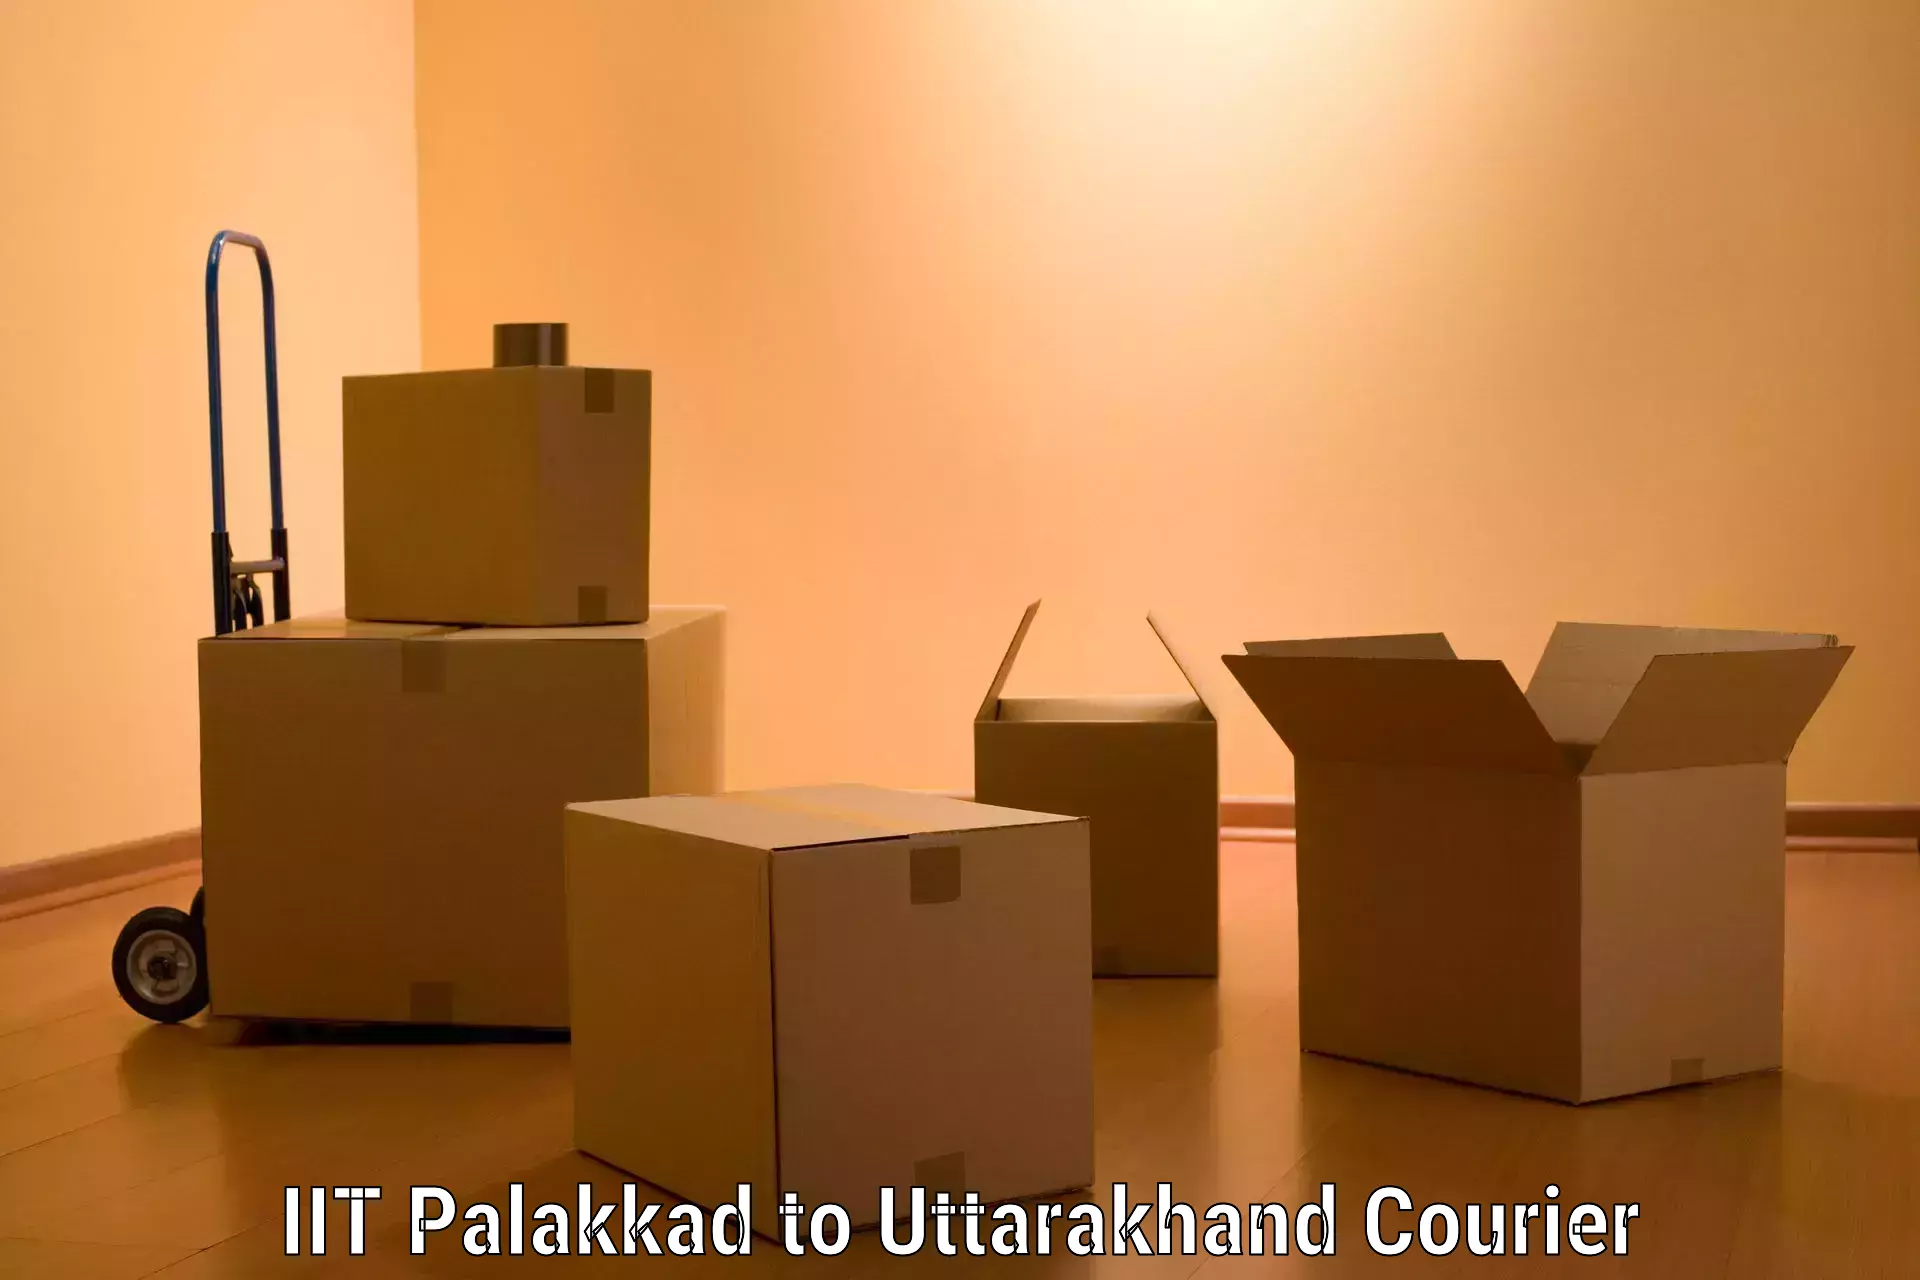 Professional moving assistance in IIT Palakkad to Uttarakhand